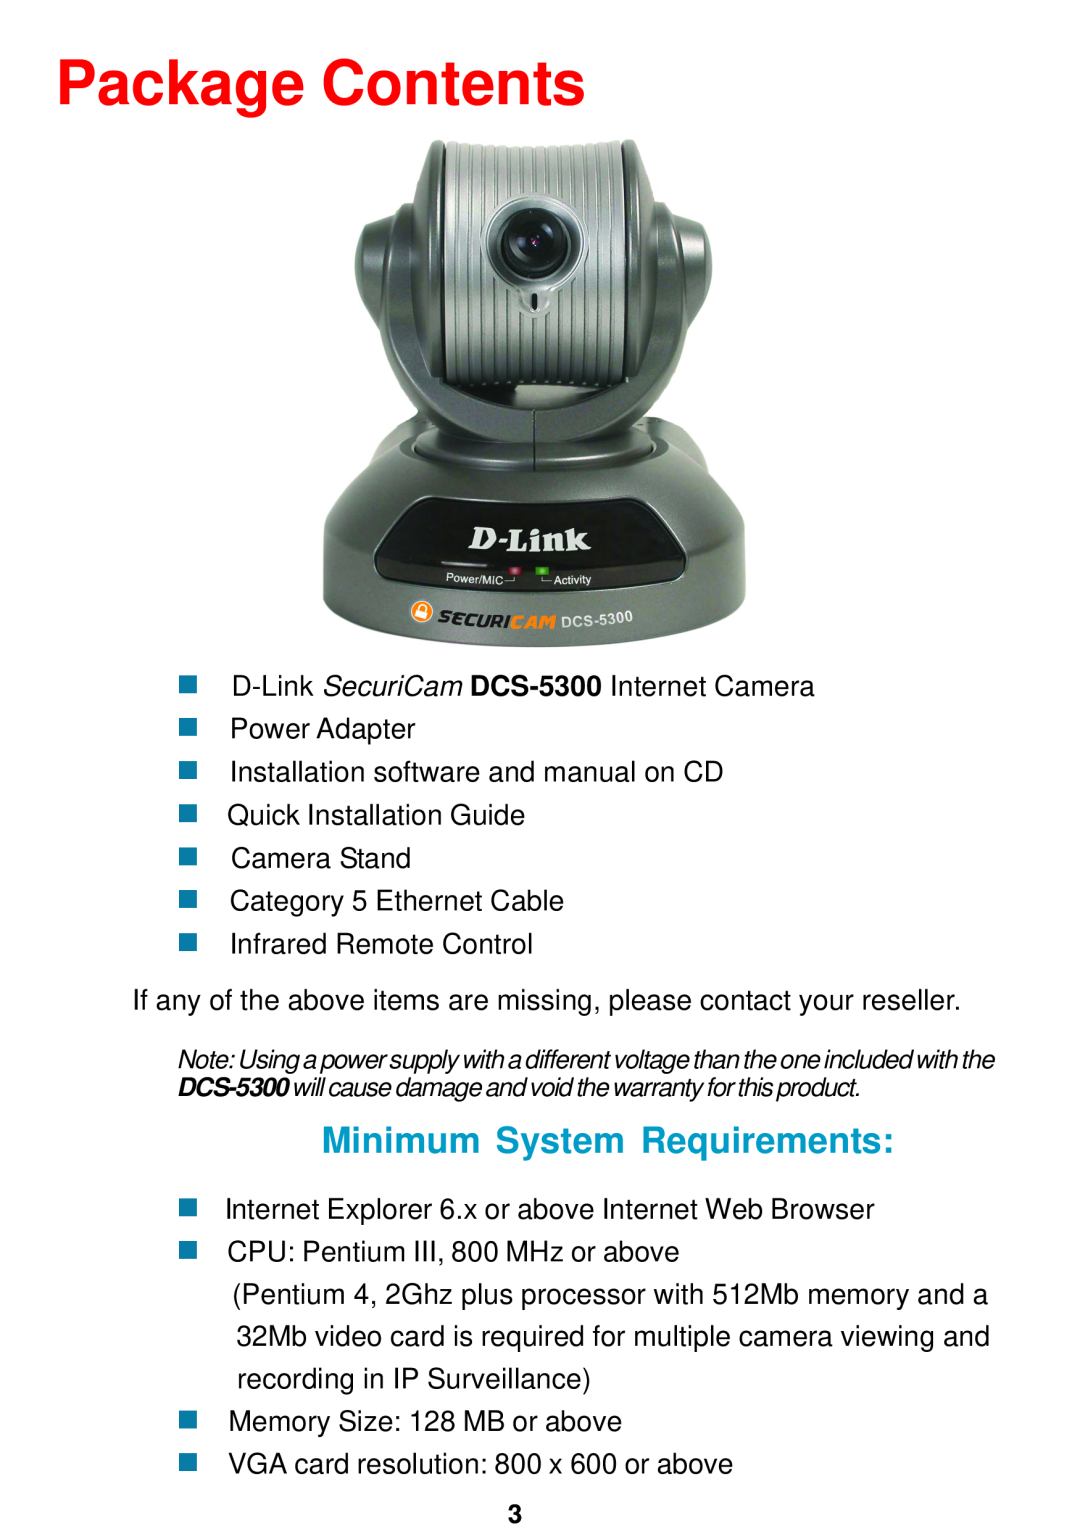 D-Link DCS-5300 manual Package Contents, Minimum System Requirements 